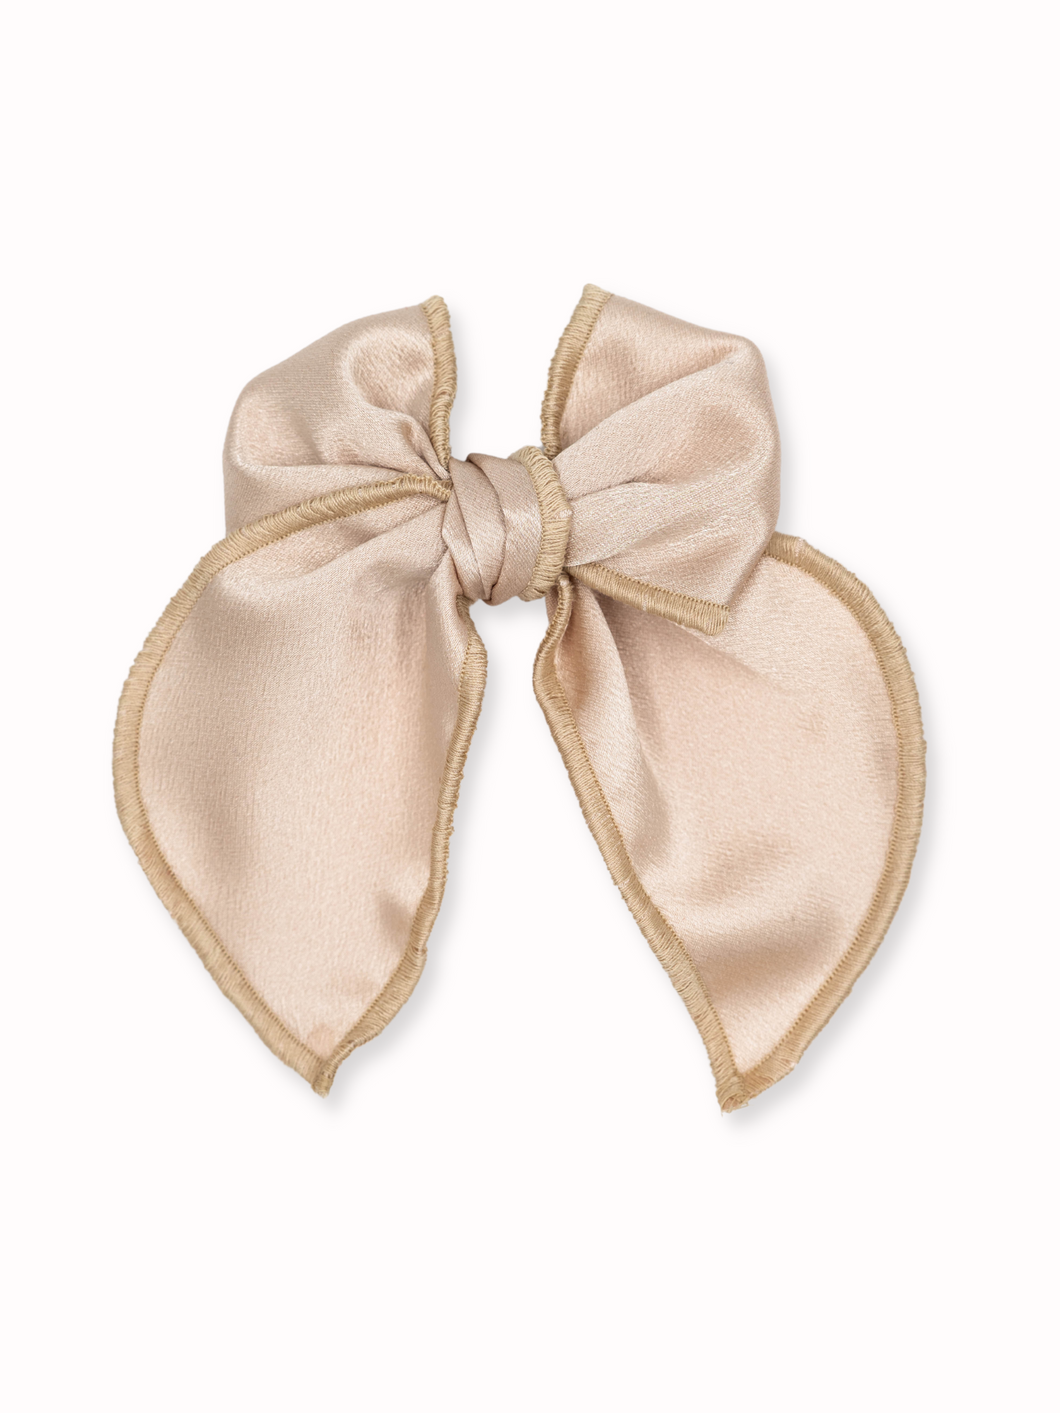 Reese Gold Satin Fable Bow